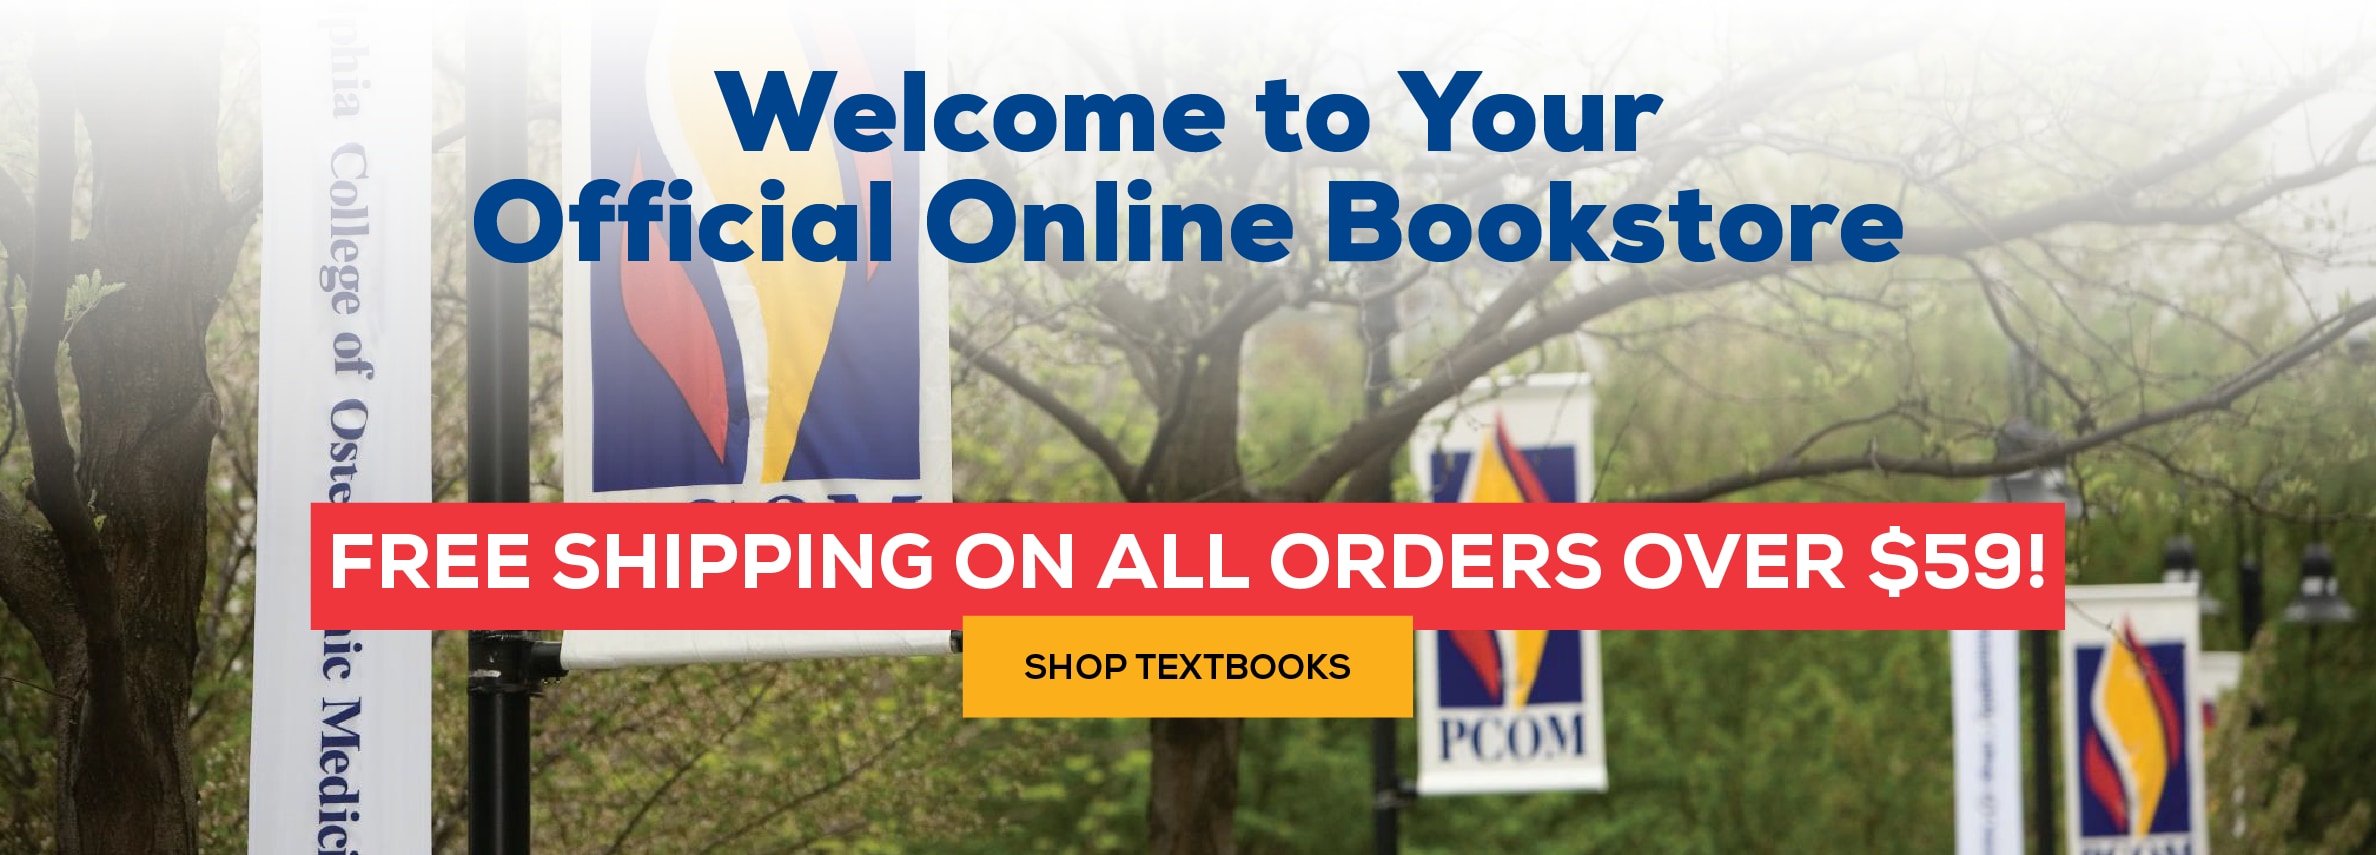 Welcome to your official online bookstore. order now free shipping on all orders over $59!